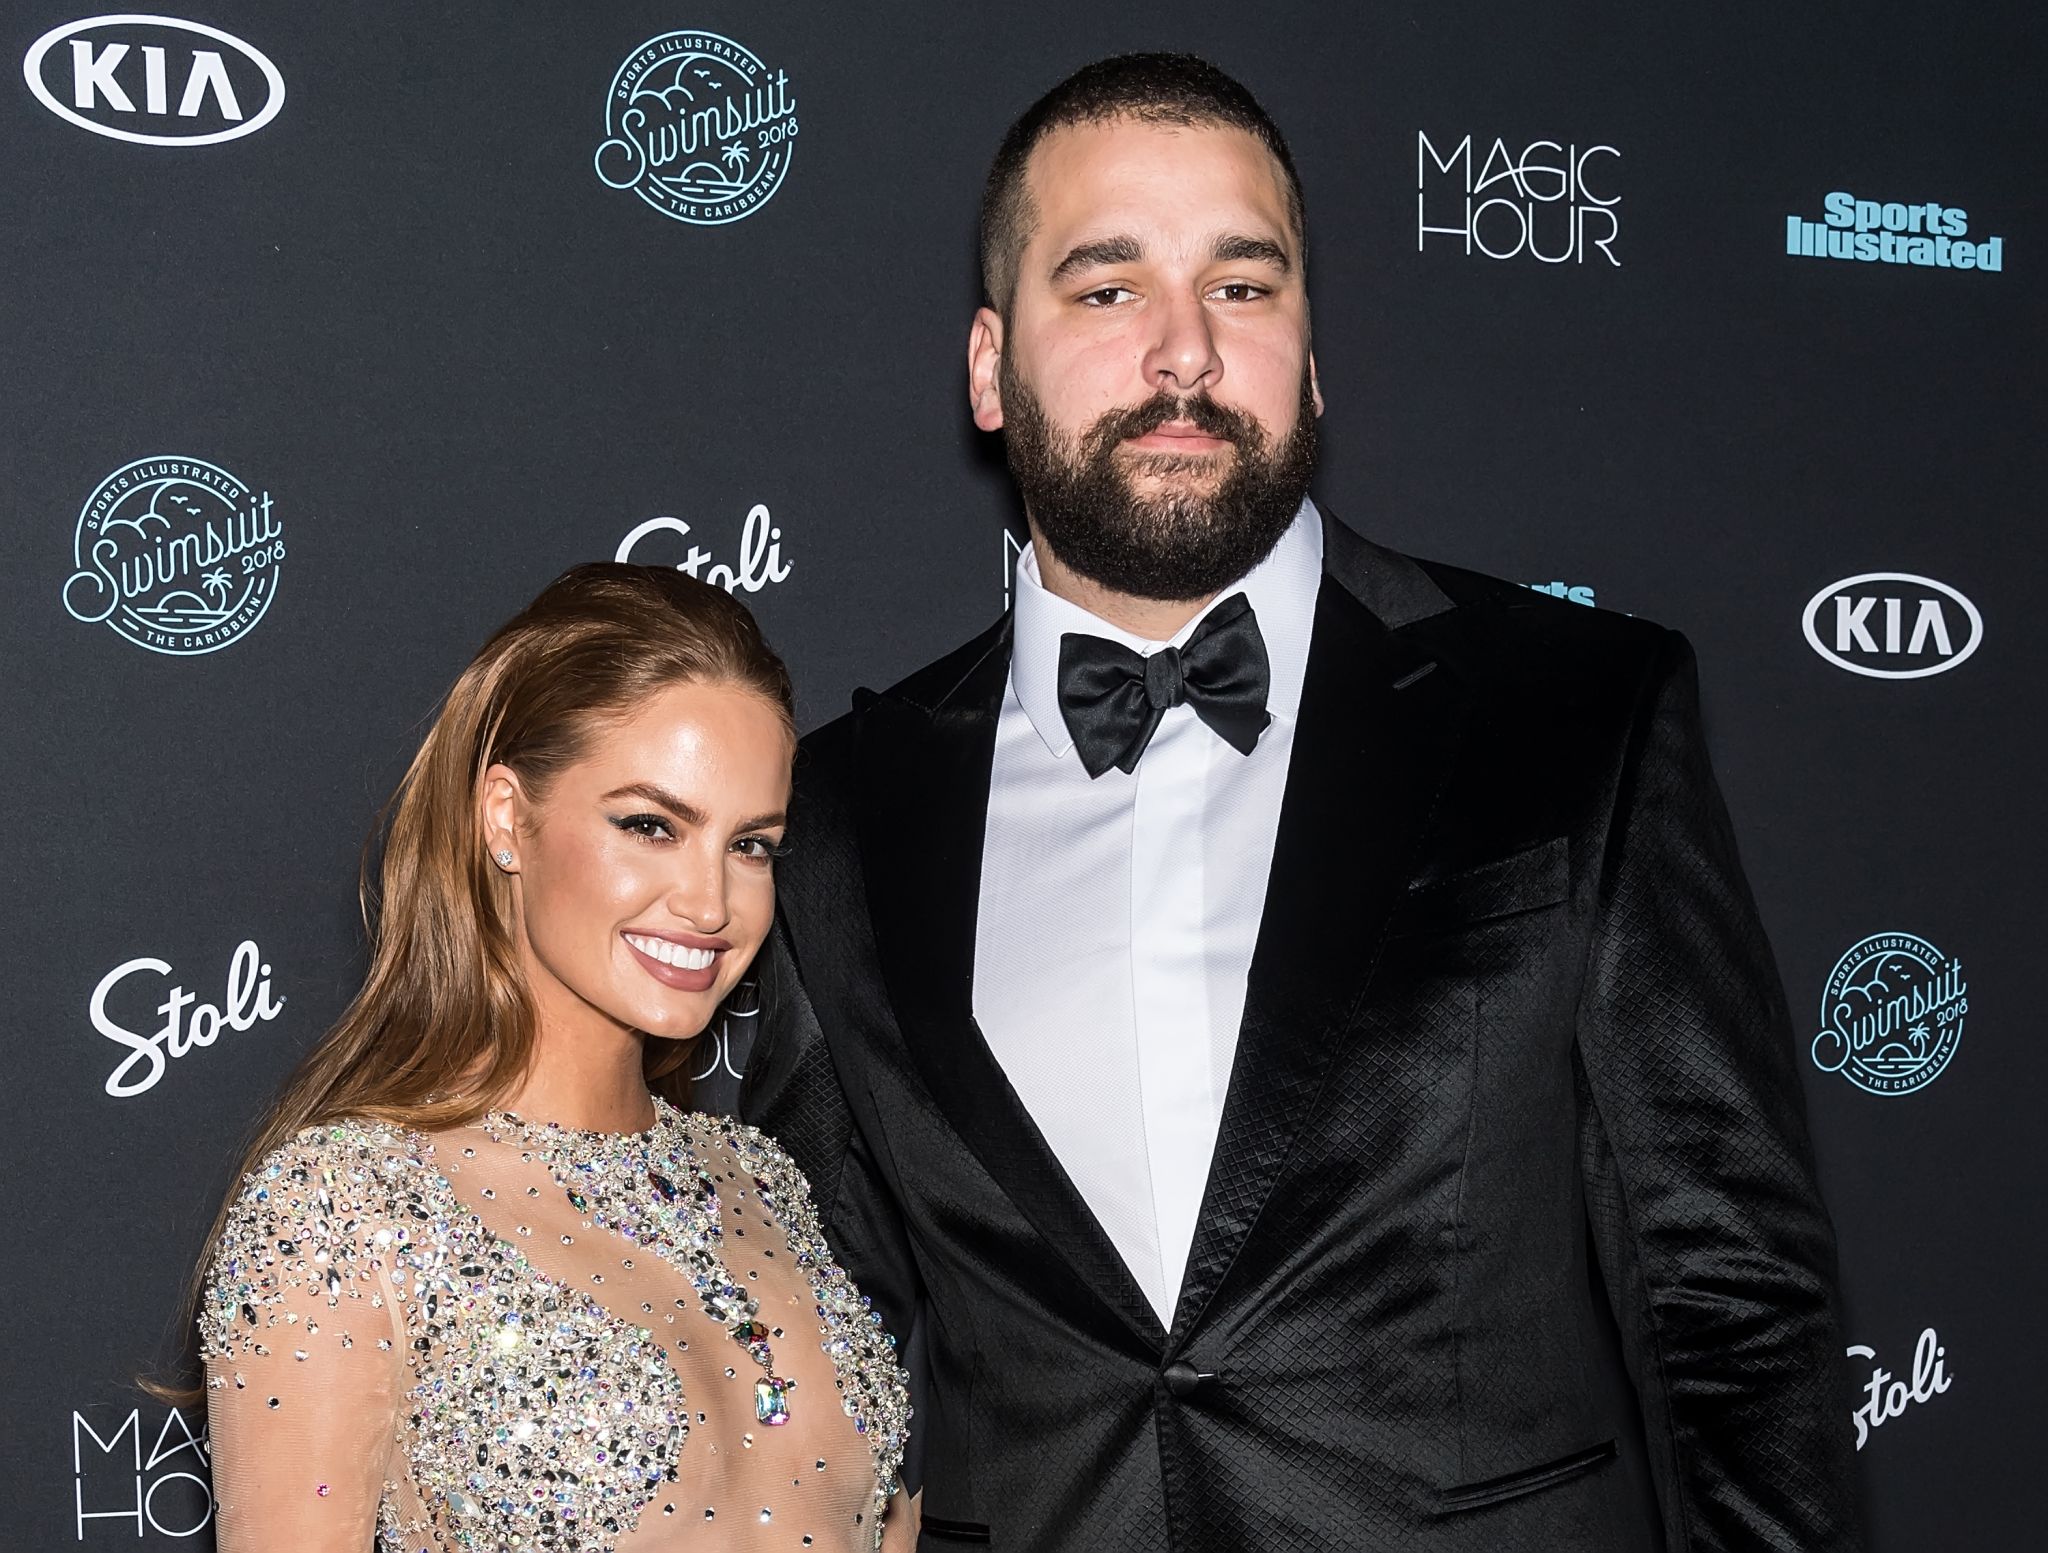 Haley Kalil Wife Of Texans Matt Kalil Featured In Sports Illustrated